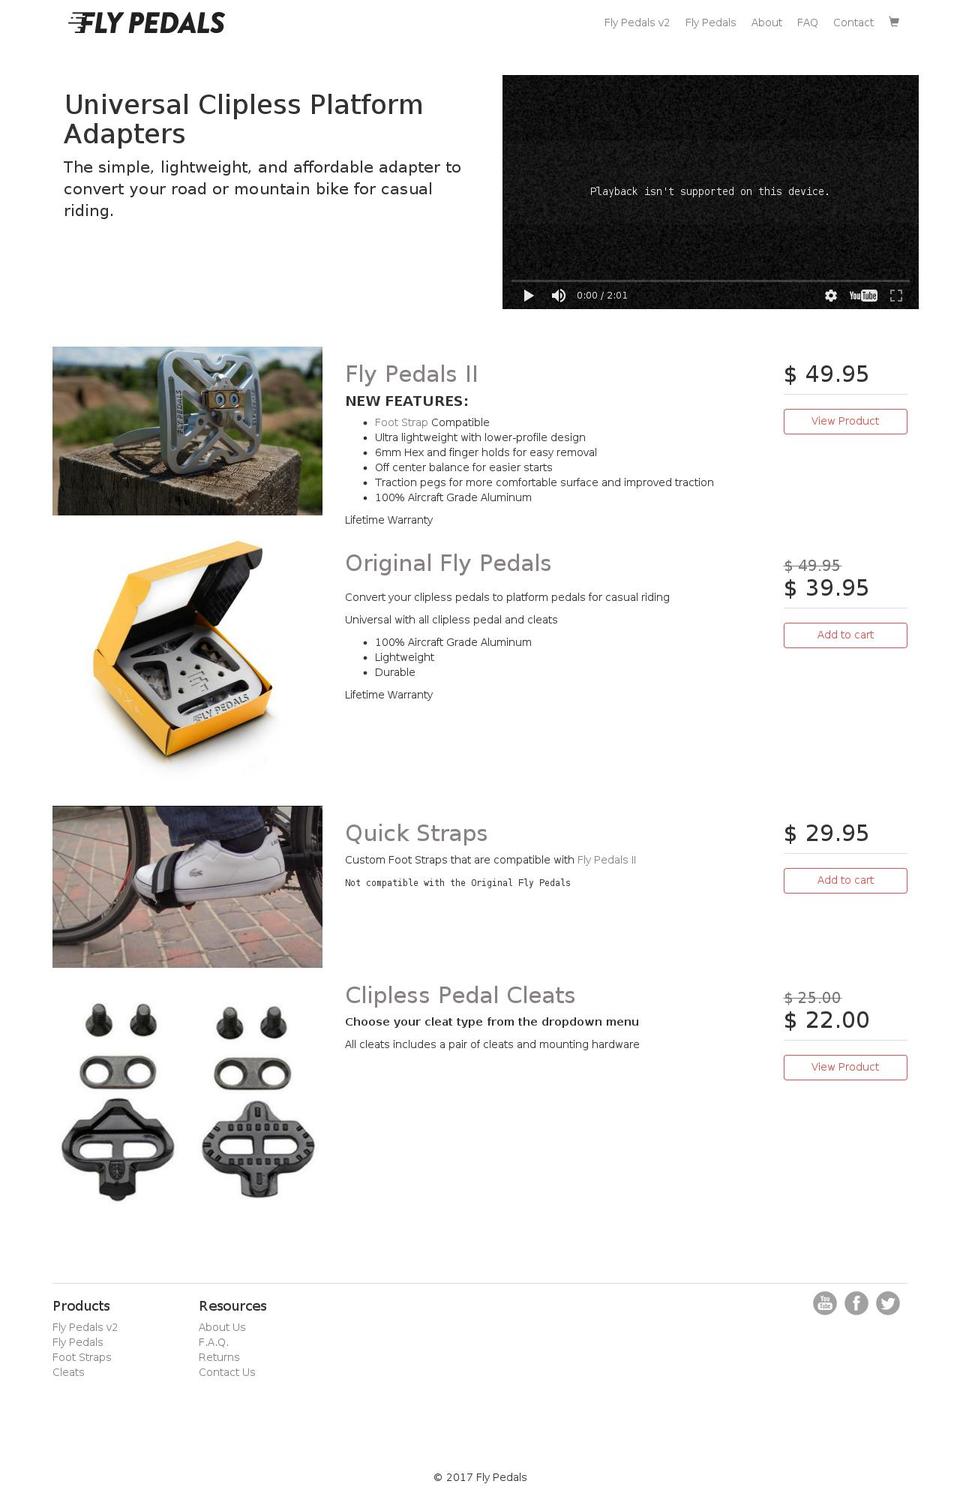 Startup Shopify theme site example flypedals.com